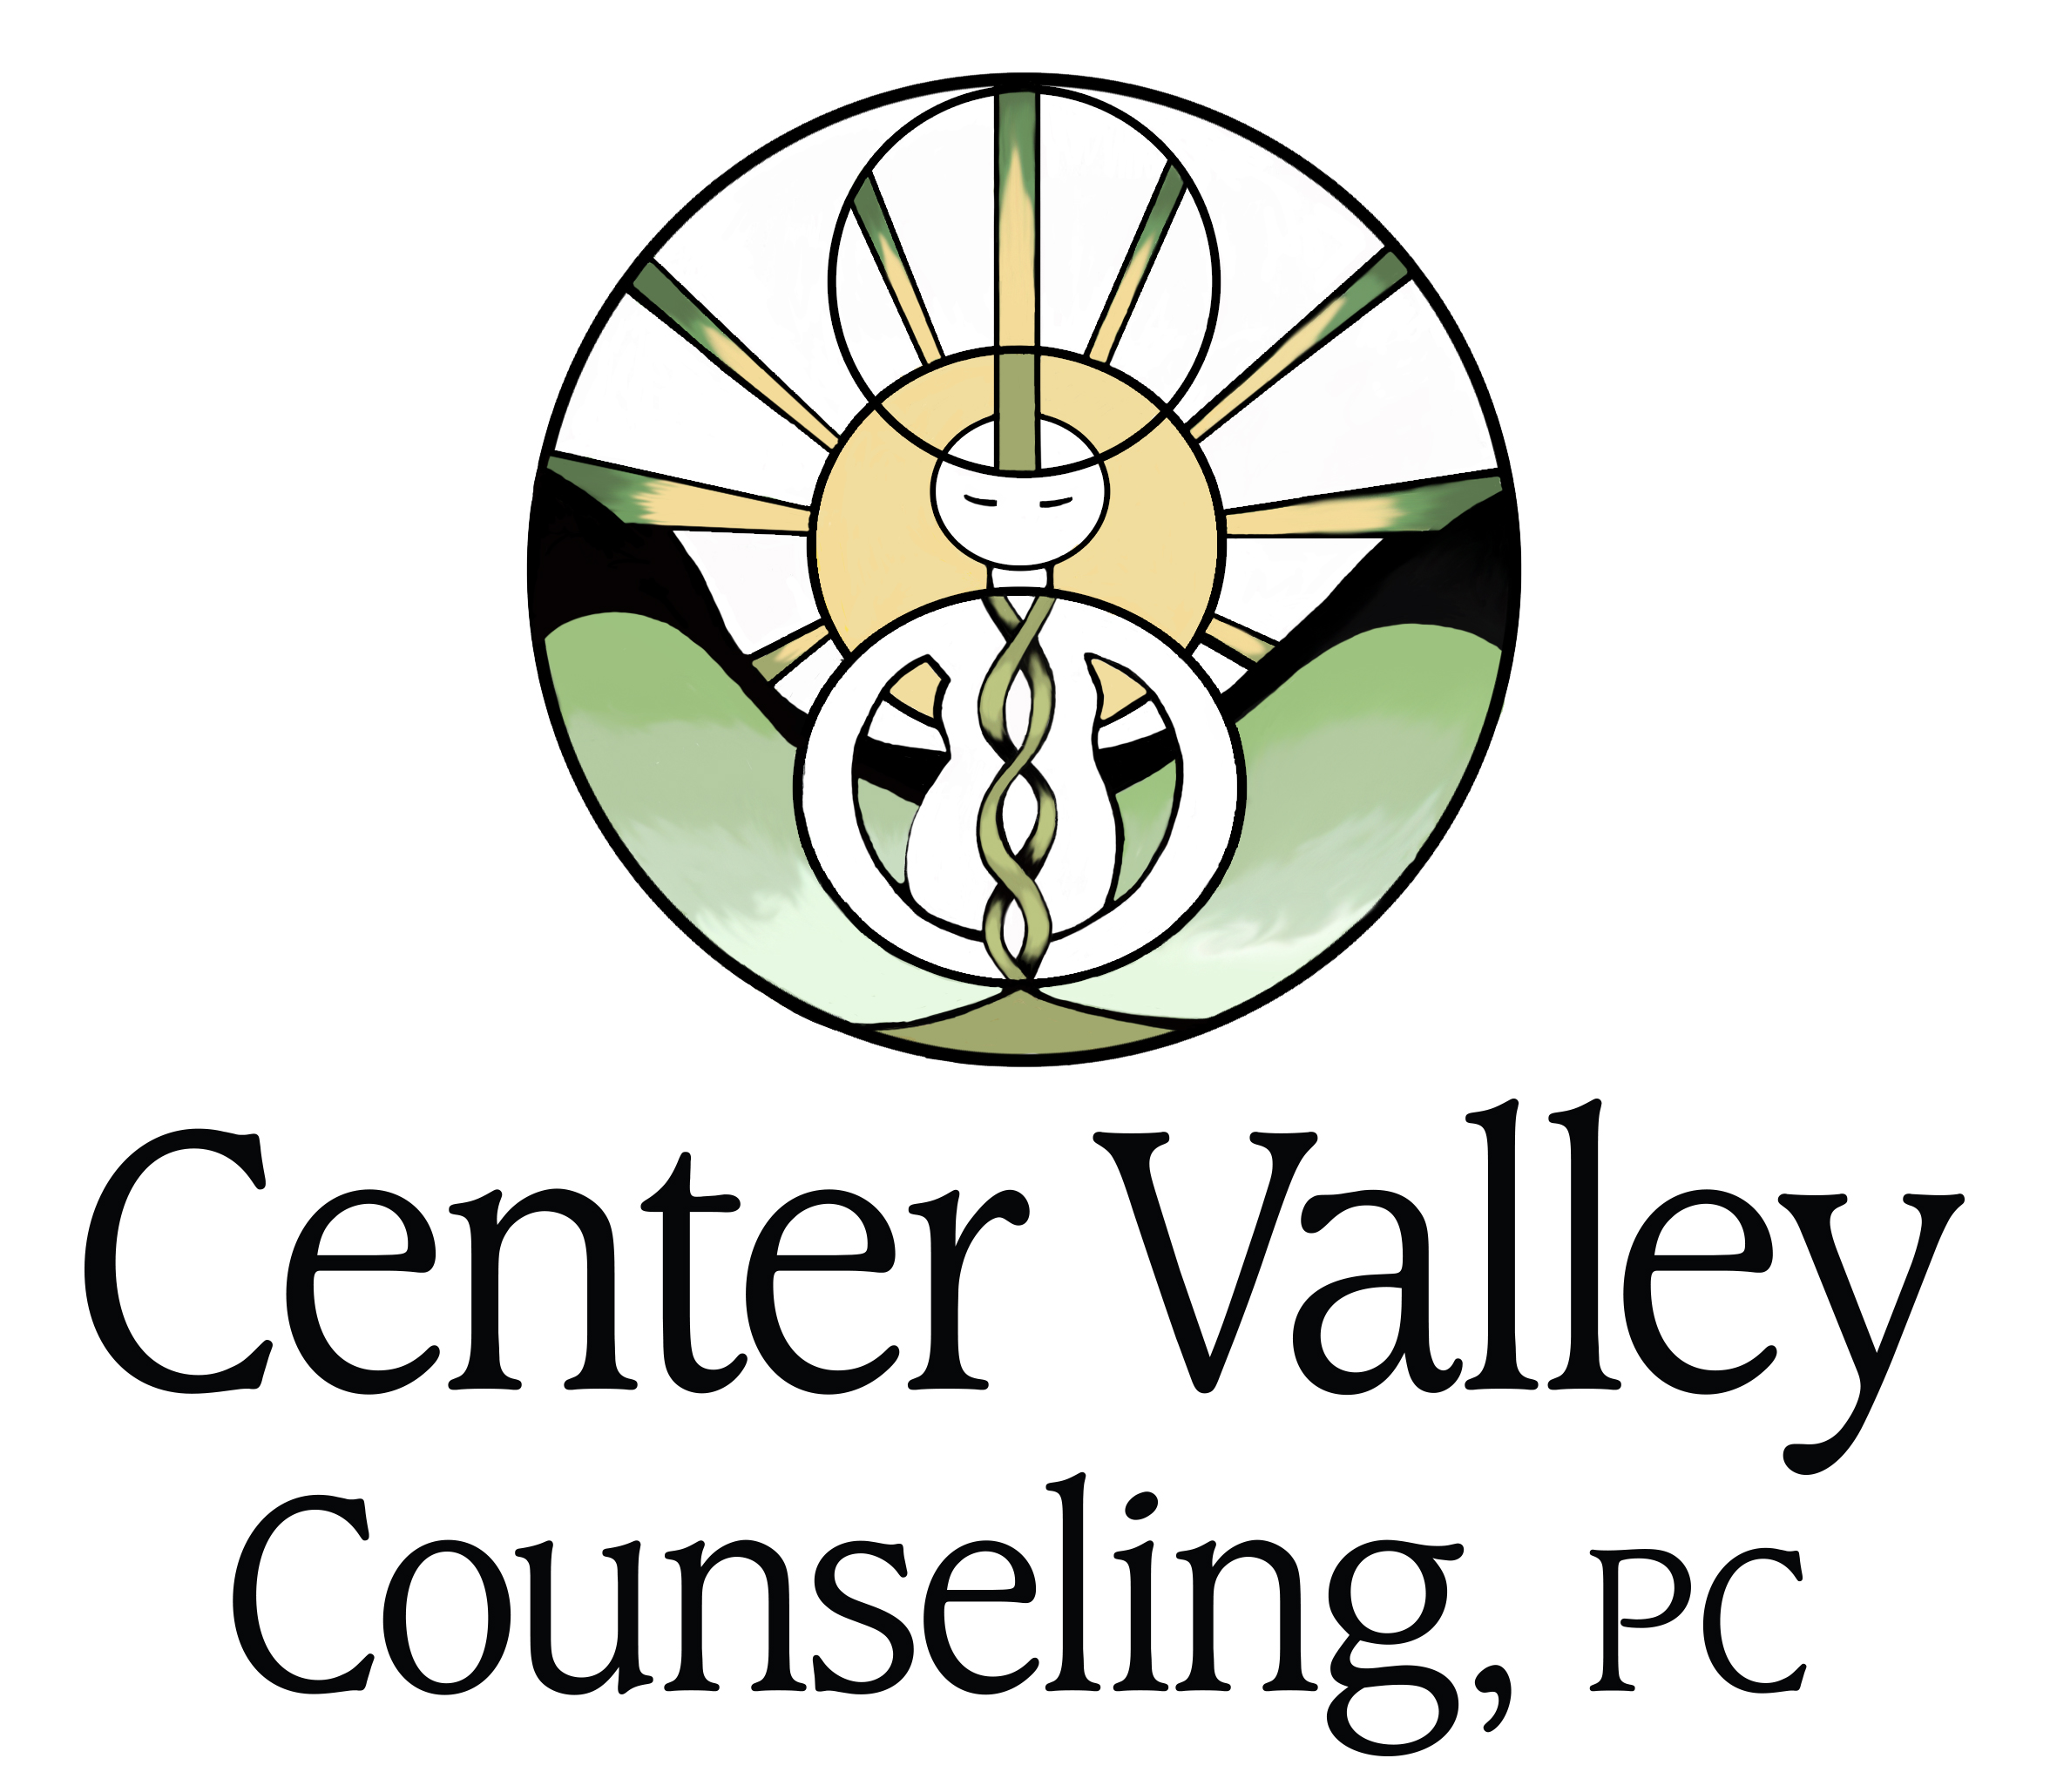 Center Valley Counseling, Inc.